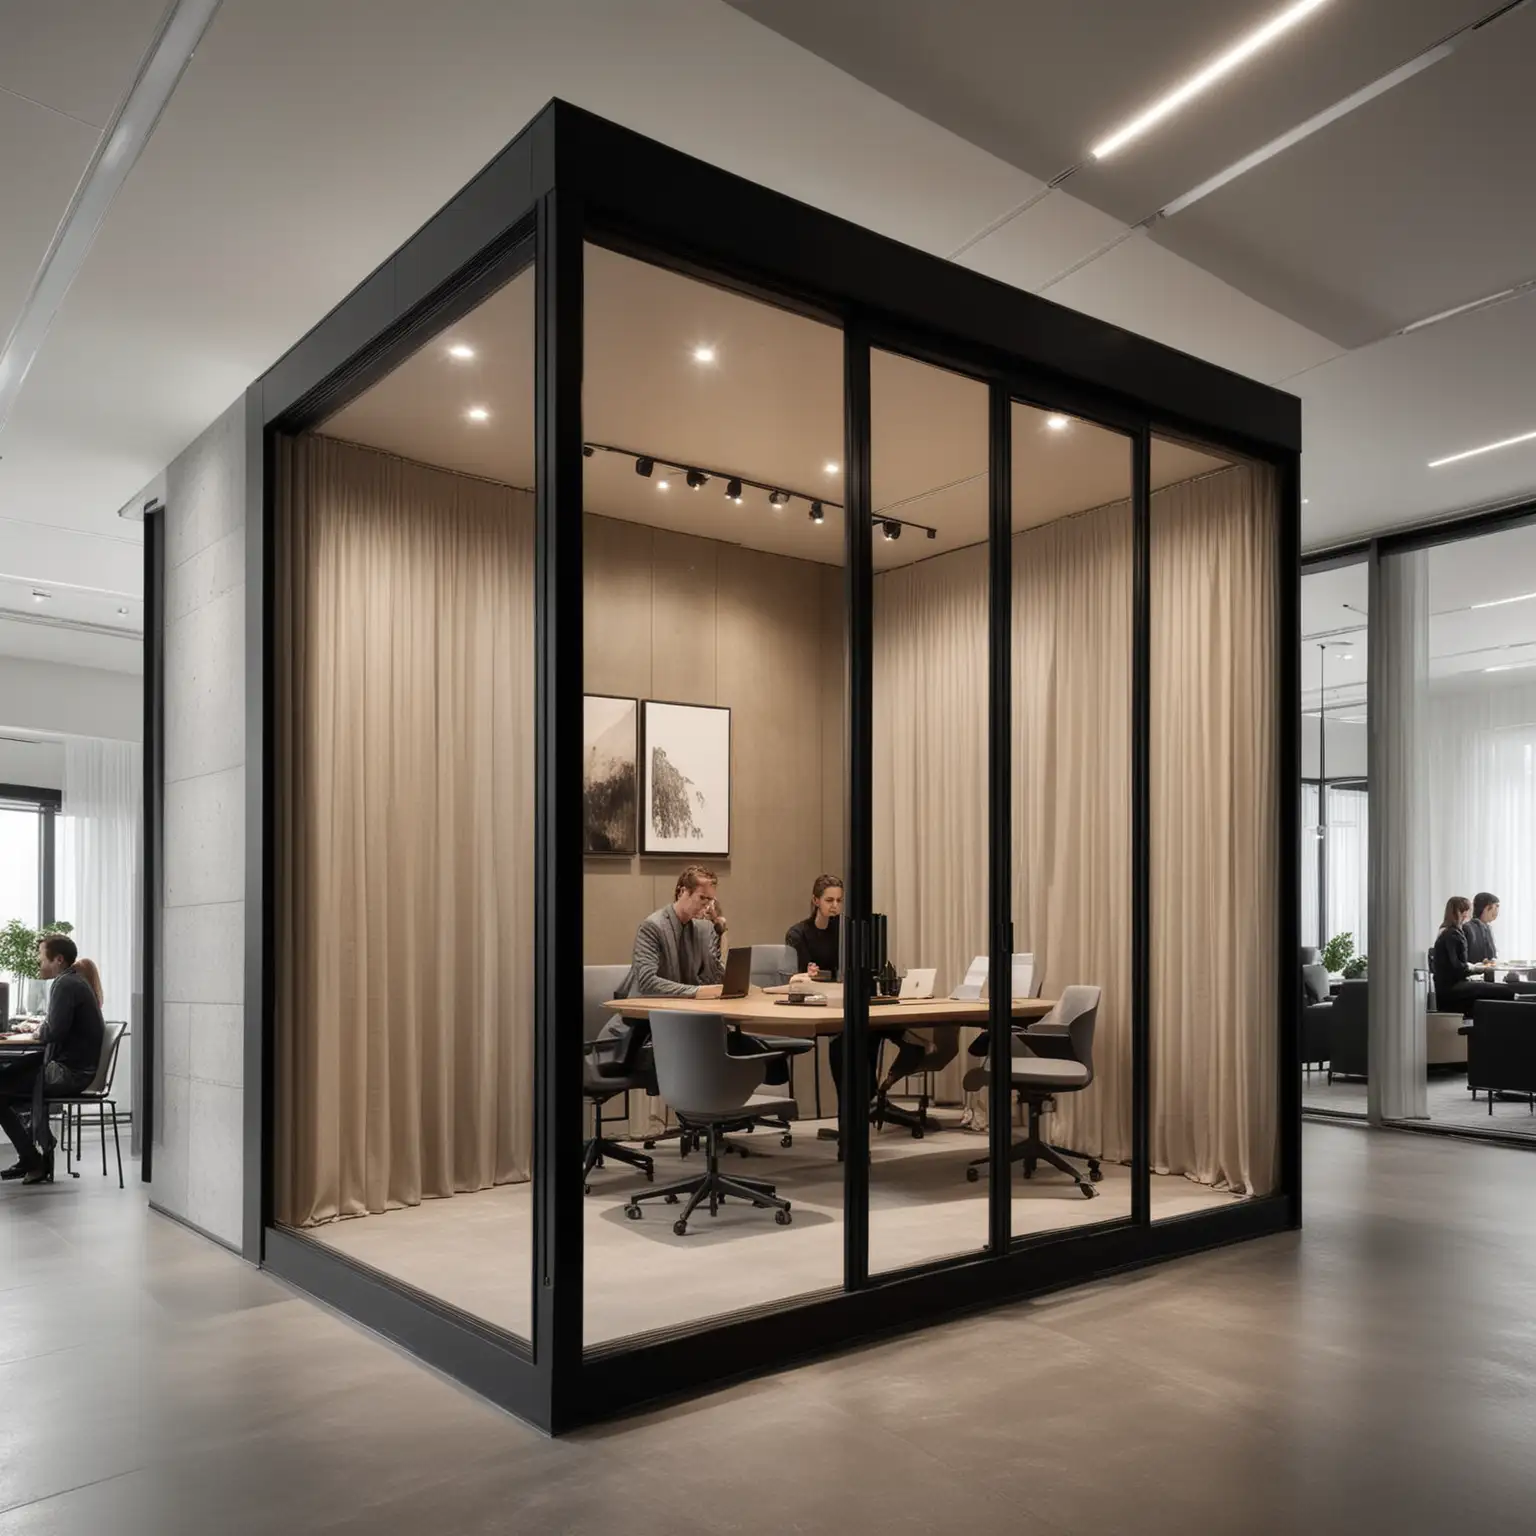 Contemporary Office Pavilion with Neutrally Dressed Workers